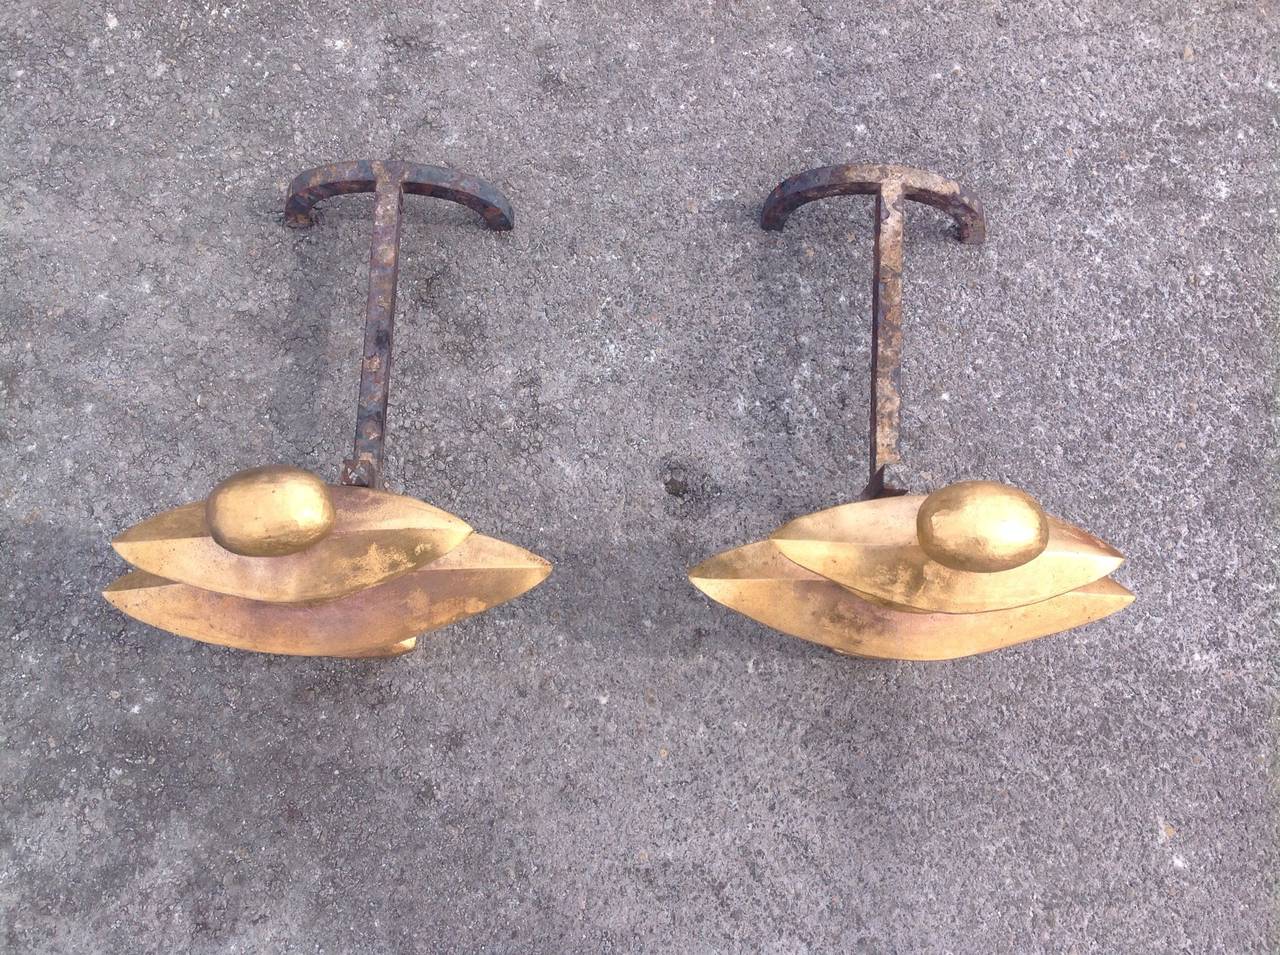 American Pair of Sculptural Gilt Bronze Andirons Designed by Diego Giacometti For Sale